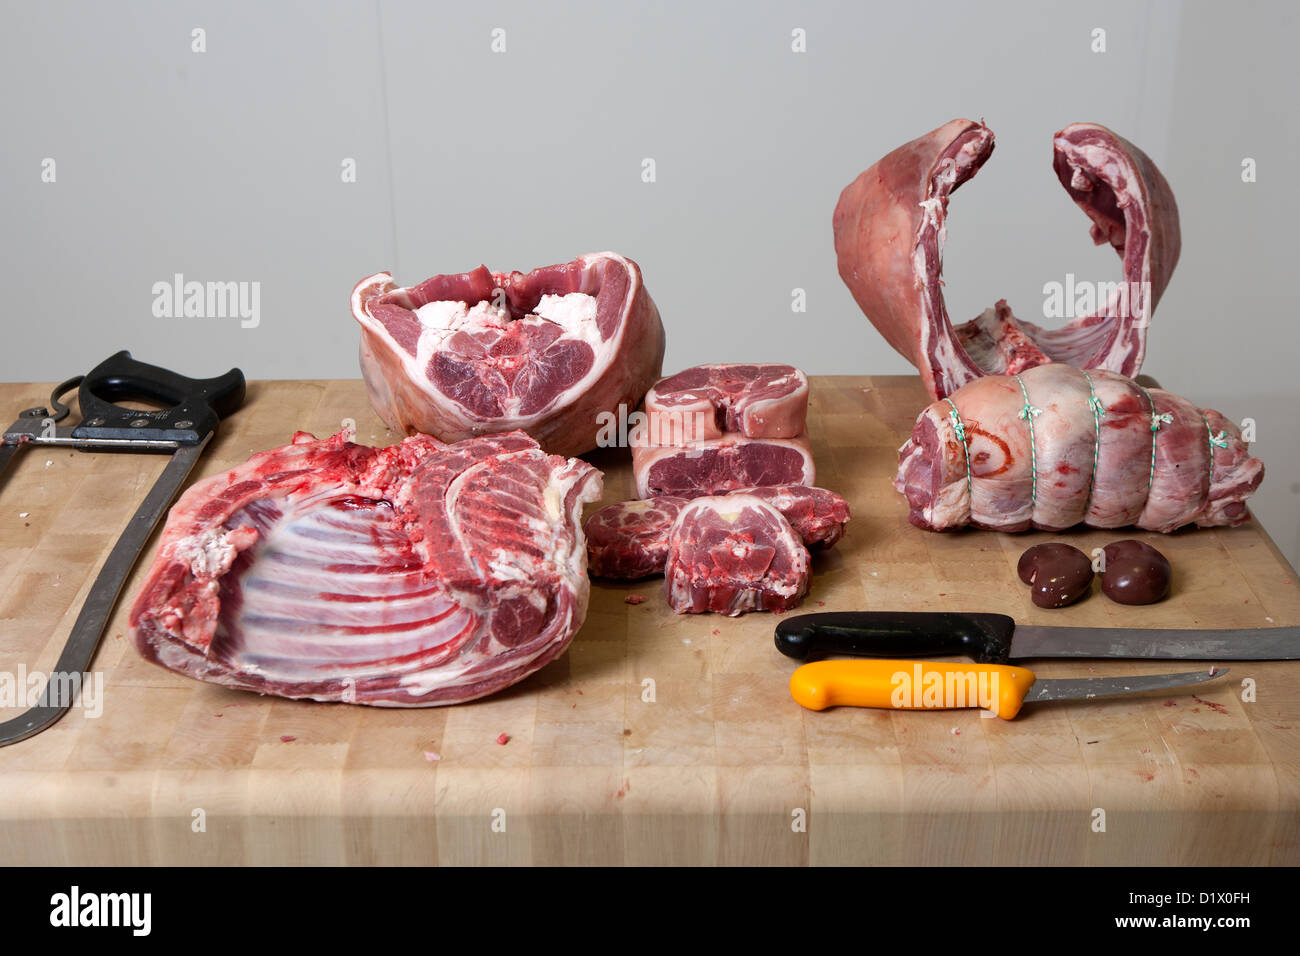 Cuts of meat from a butchered Lamb on a wooden butchers block Stock Photo